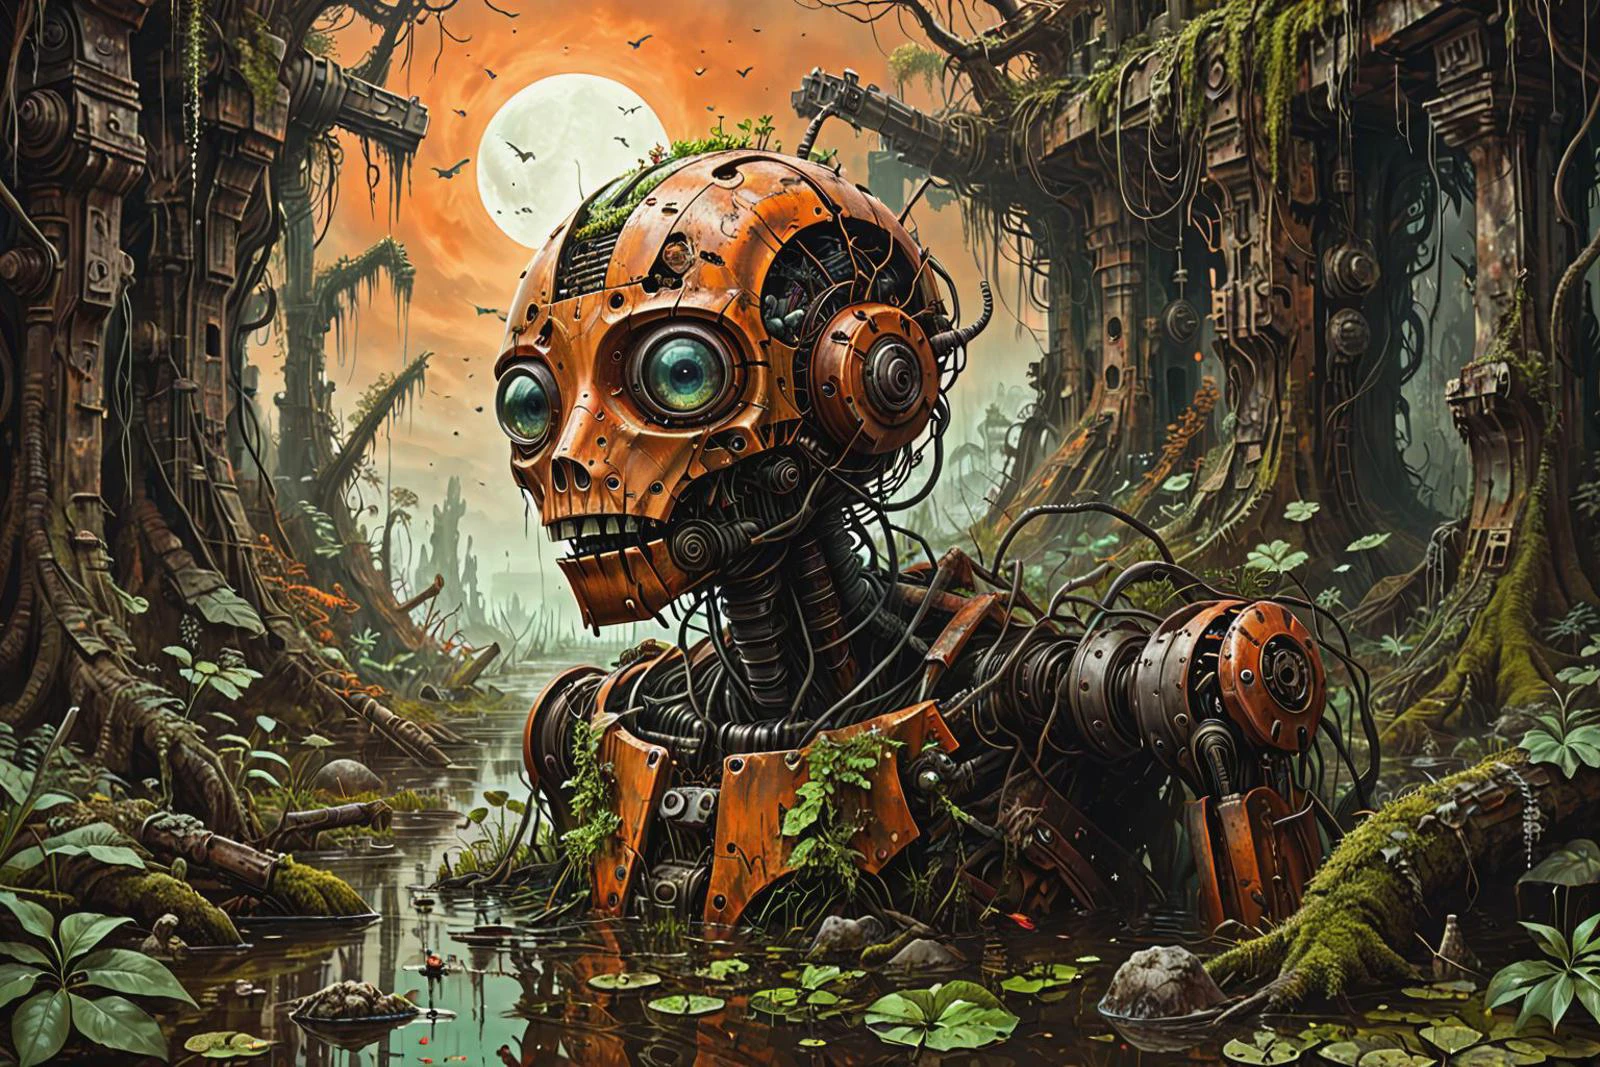 a vivid scifi illustration of fantastical surreal broken rusted and overgrown war robot drowned in a swamp, destroyed weapons, machinery, moss, leaves, trees, jungle, dark-orange sky,
 linquivera
 illusion